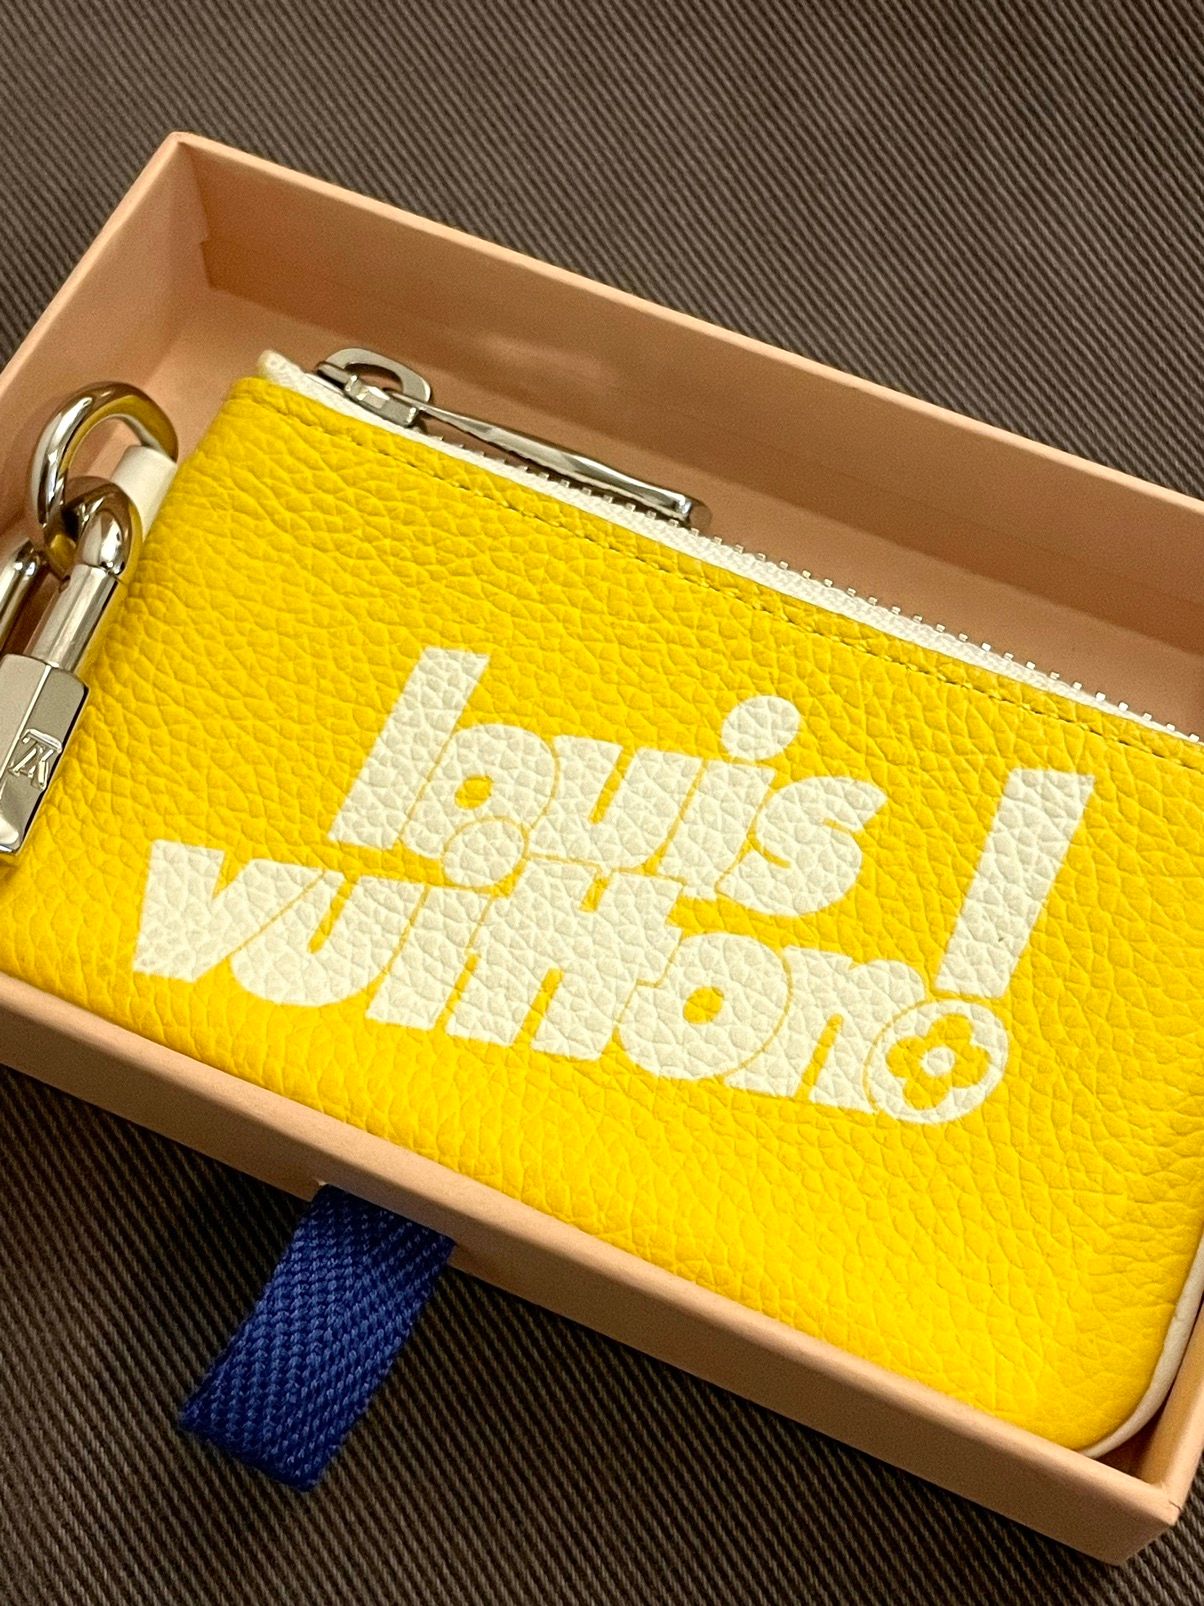 Pre-owned Louis Vuitton X Virgil Abloh Louis Vuitton C/o Virgil Abloh Taurillion Leather Key Pouch In Canary Yellow